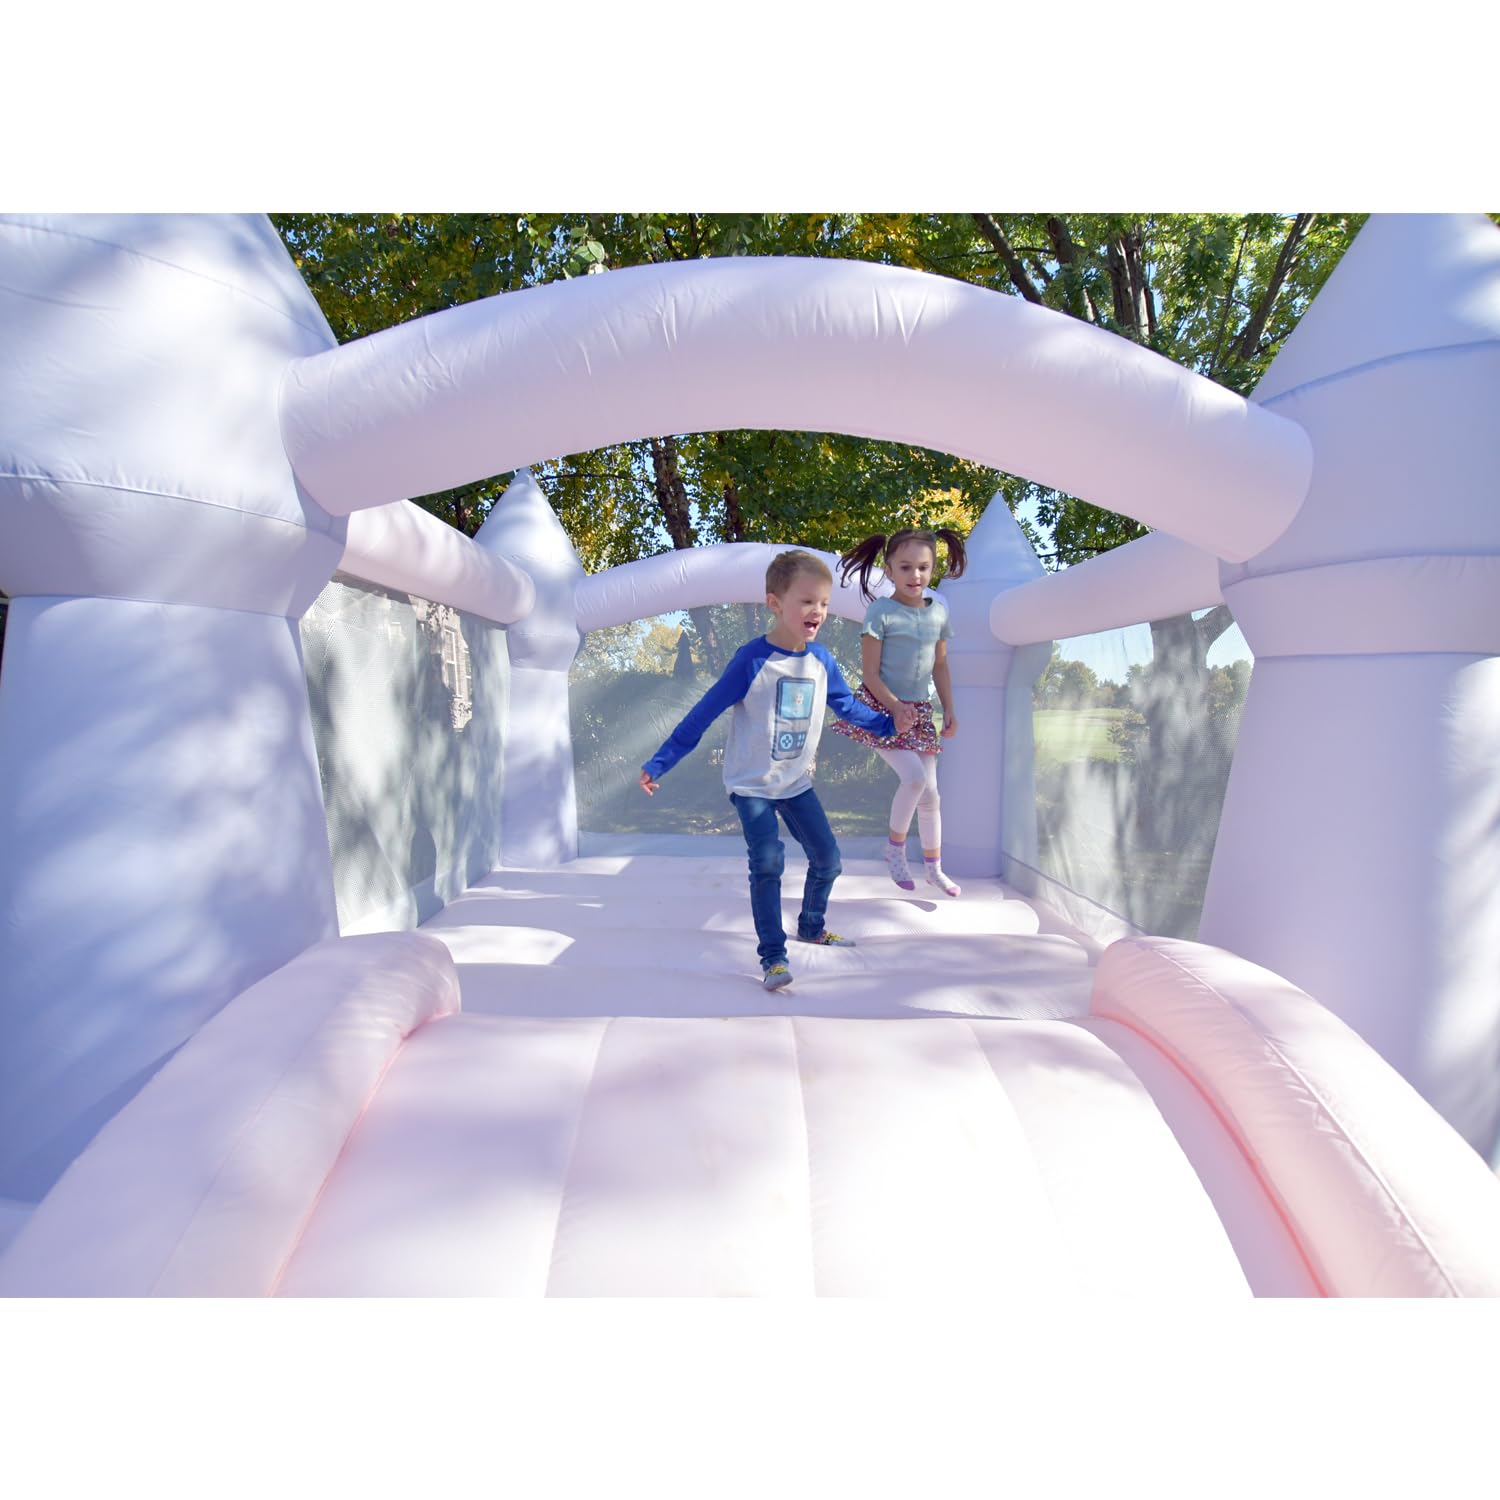 Bounceland Bouncy Castle Daydreamer Cotton Candy Bounce House, Pastel Bouncer with Slide, 12 ft L x 9 ft W x 7 ft H, UL Blower Included, Trendy Bouncer for Kids, Indoor and Outdoor Use